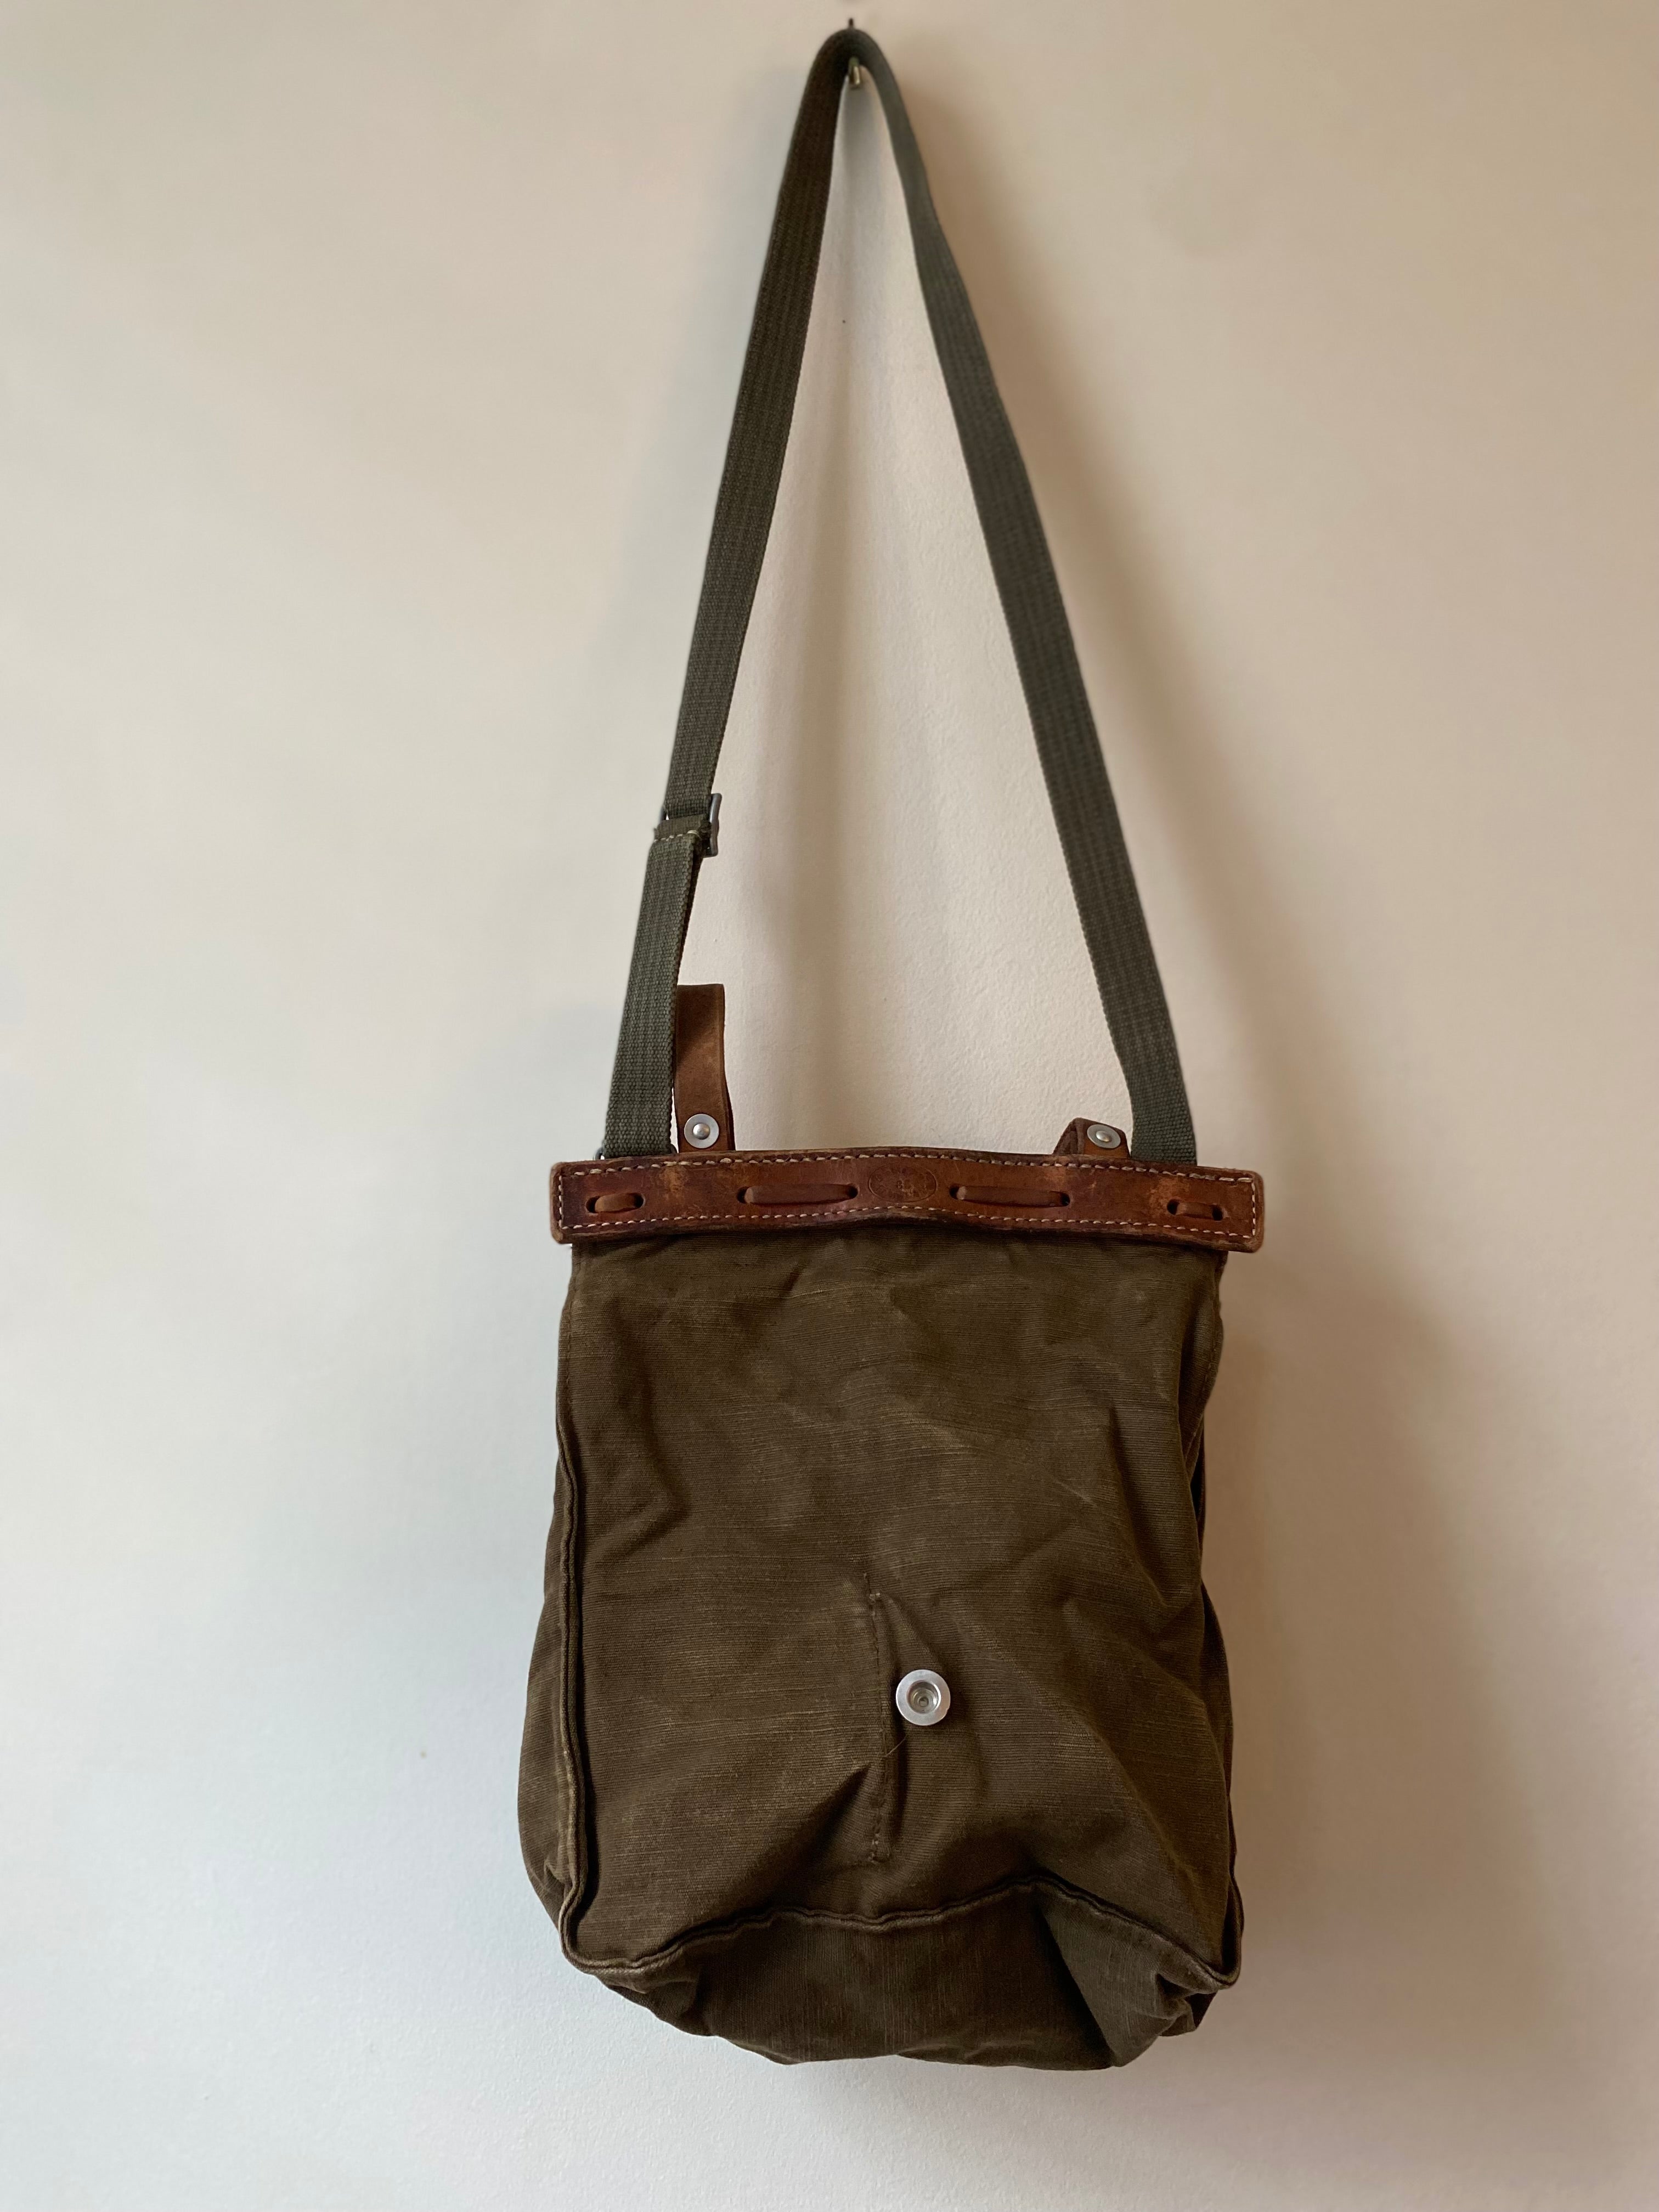 Vintage Swiss Fly-Fishing Bag  Fly fishing bag, Bags, Fish in a bag